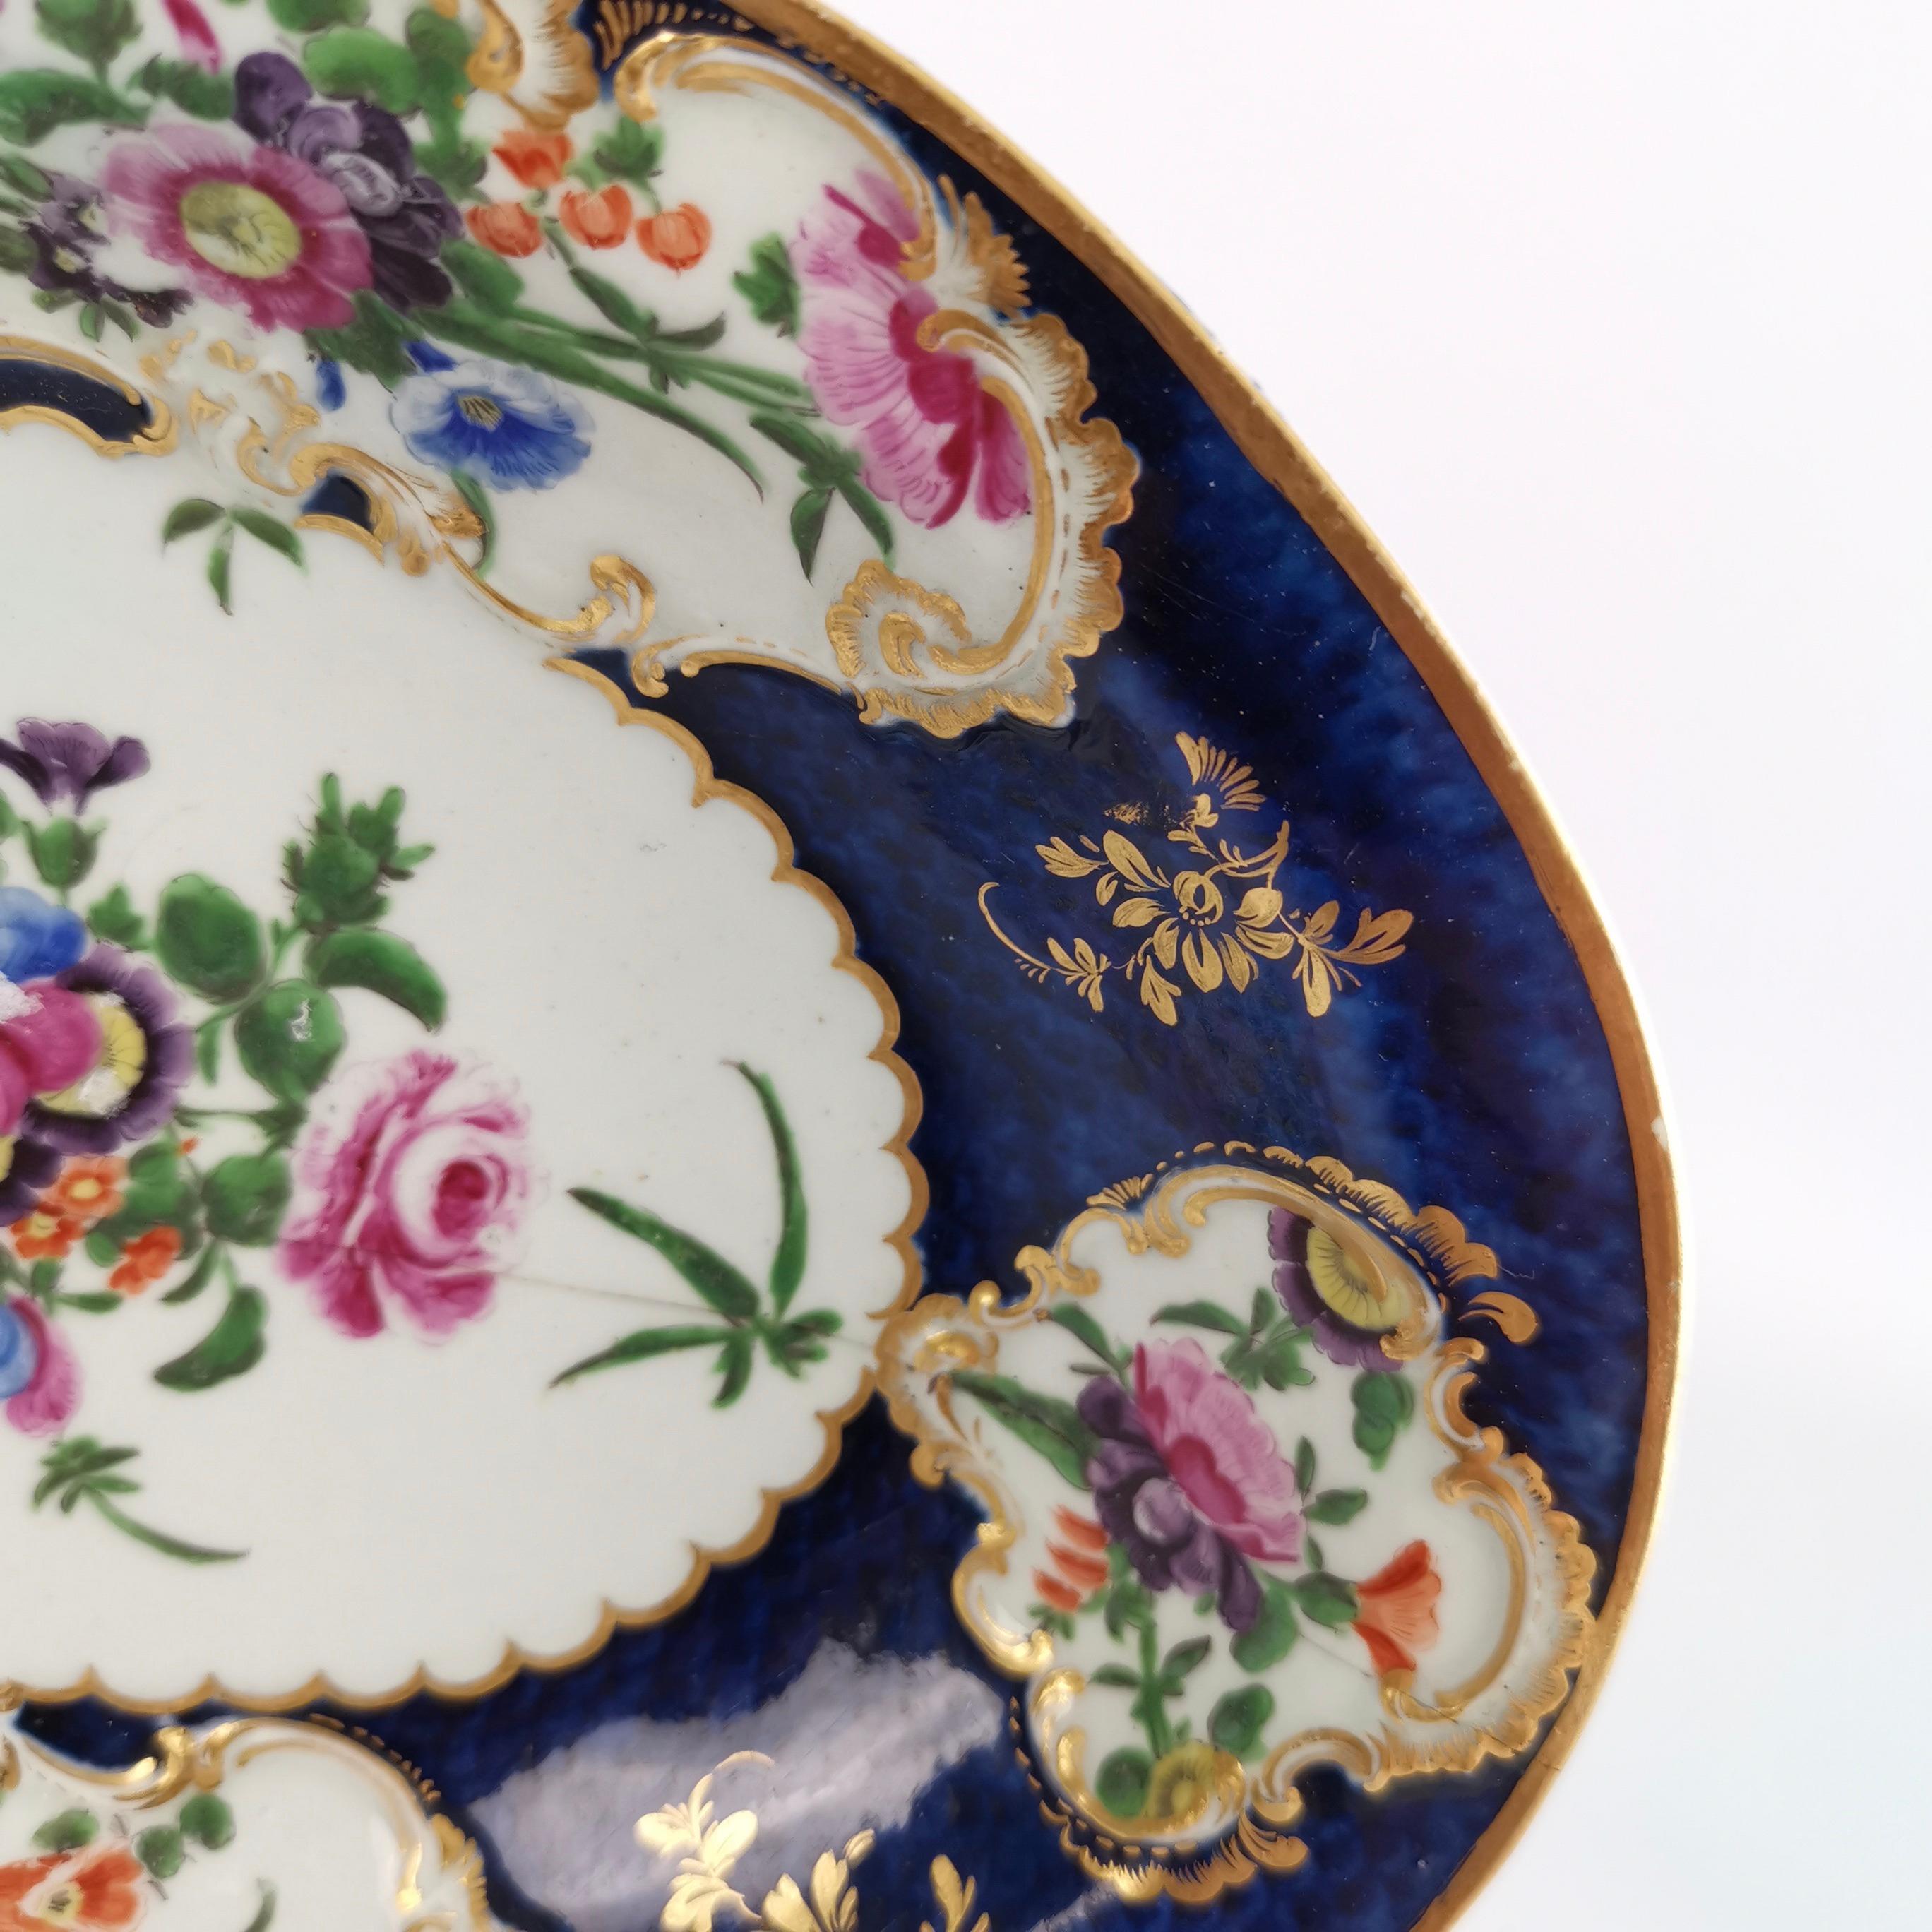 Hand-Painted Worcester Oval Dish, Blue Scale with Flower Reserves, 19th Century, 1765-1770